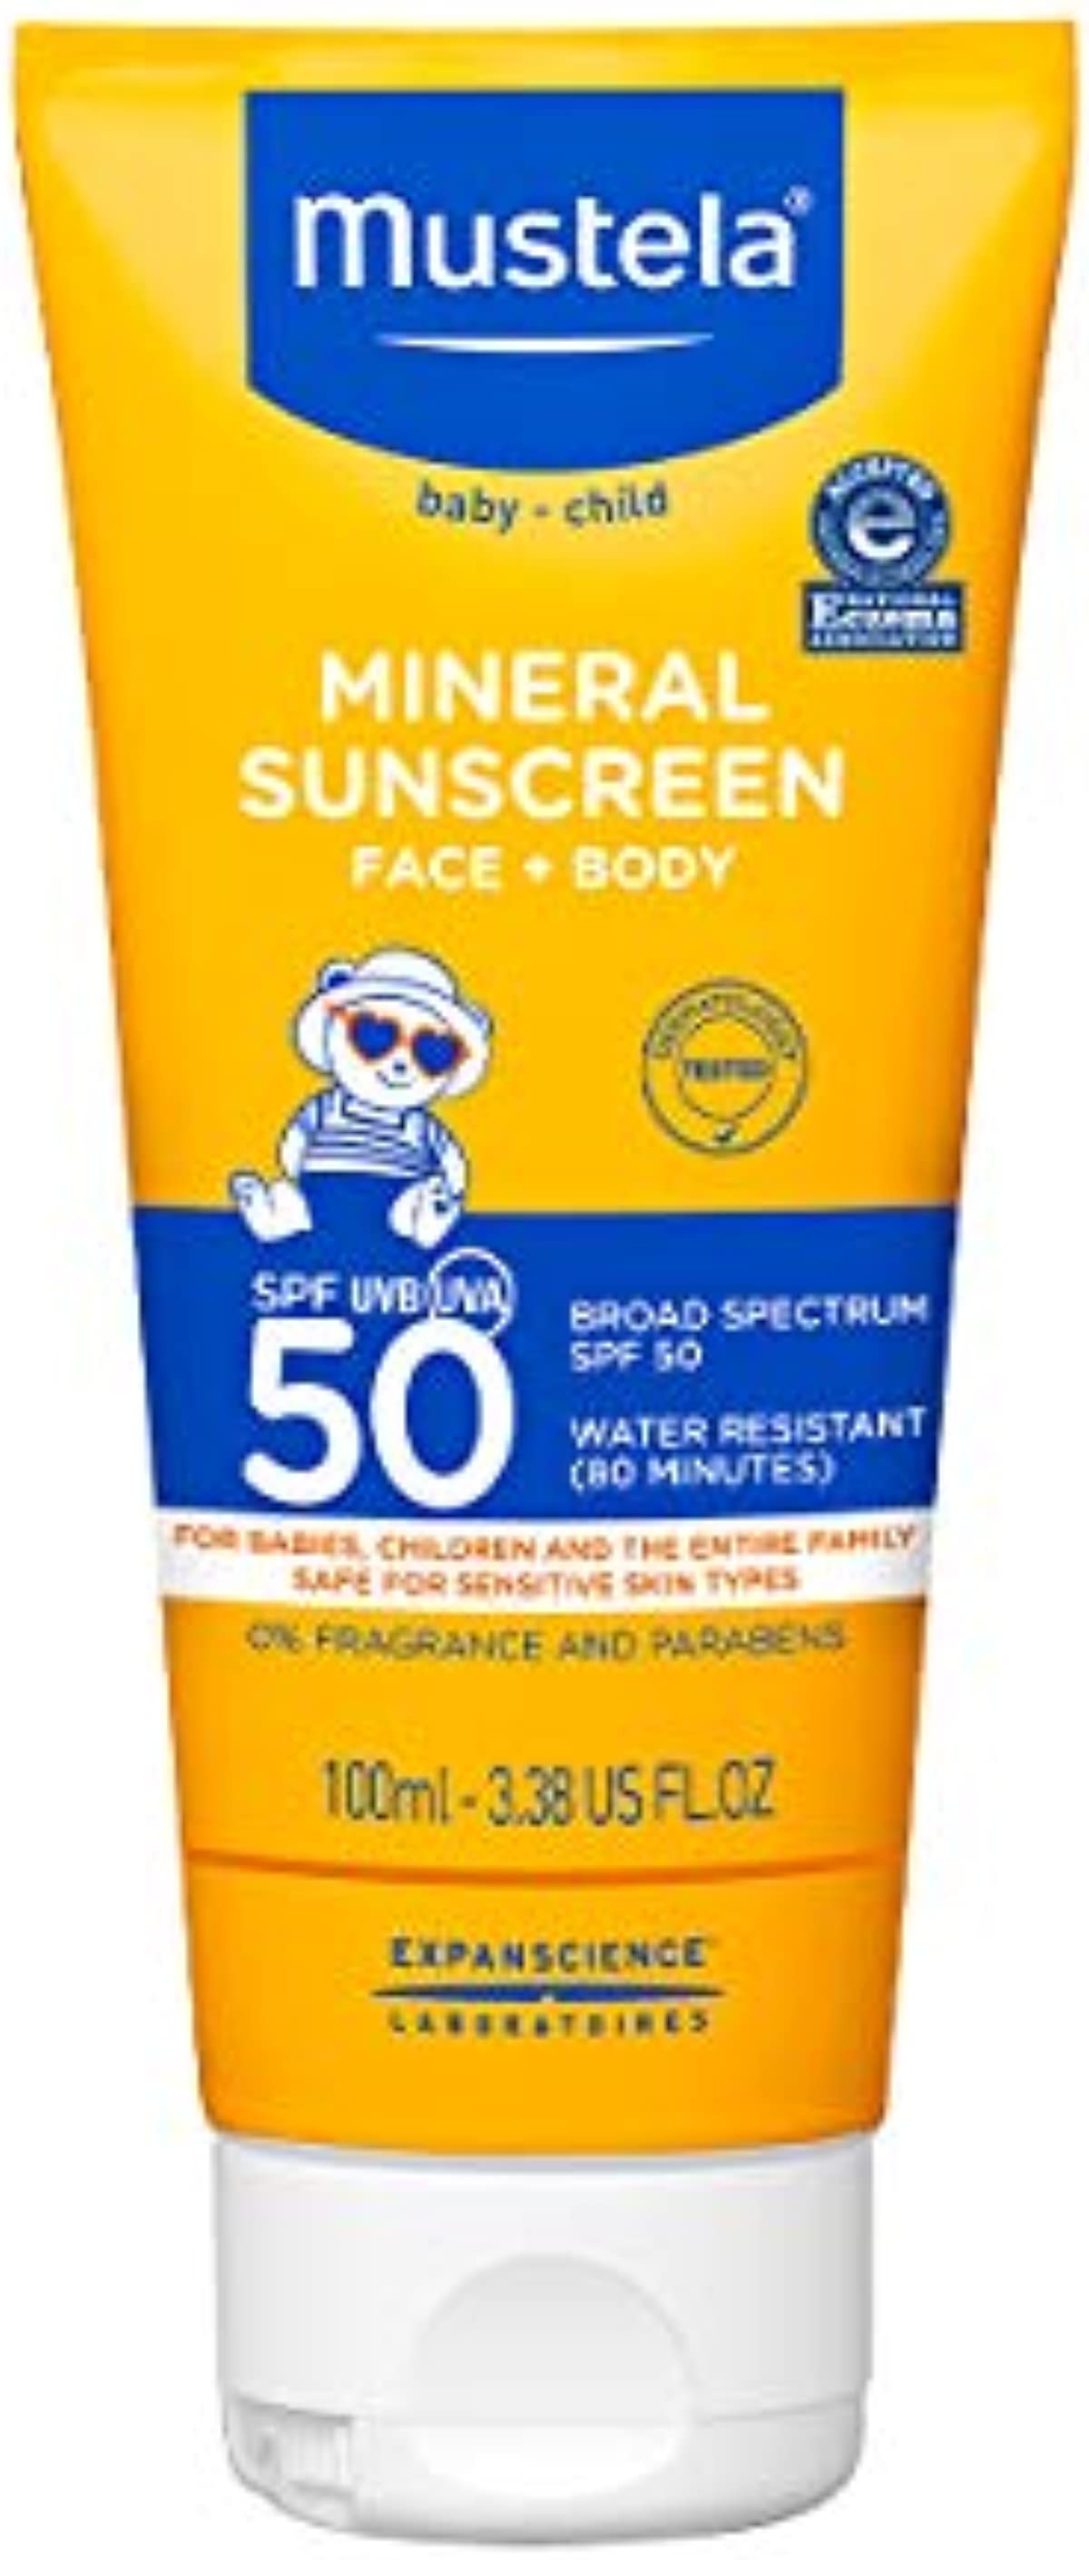 Mustela Baby Mineral Sunscreen Lotion SPF 50 Broad Spectrum - Face & Body Sun Lotion for Sensitive Skin - Non-Nano, Water Resistant & Fragrance Free - Regular & Family Size